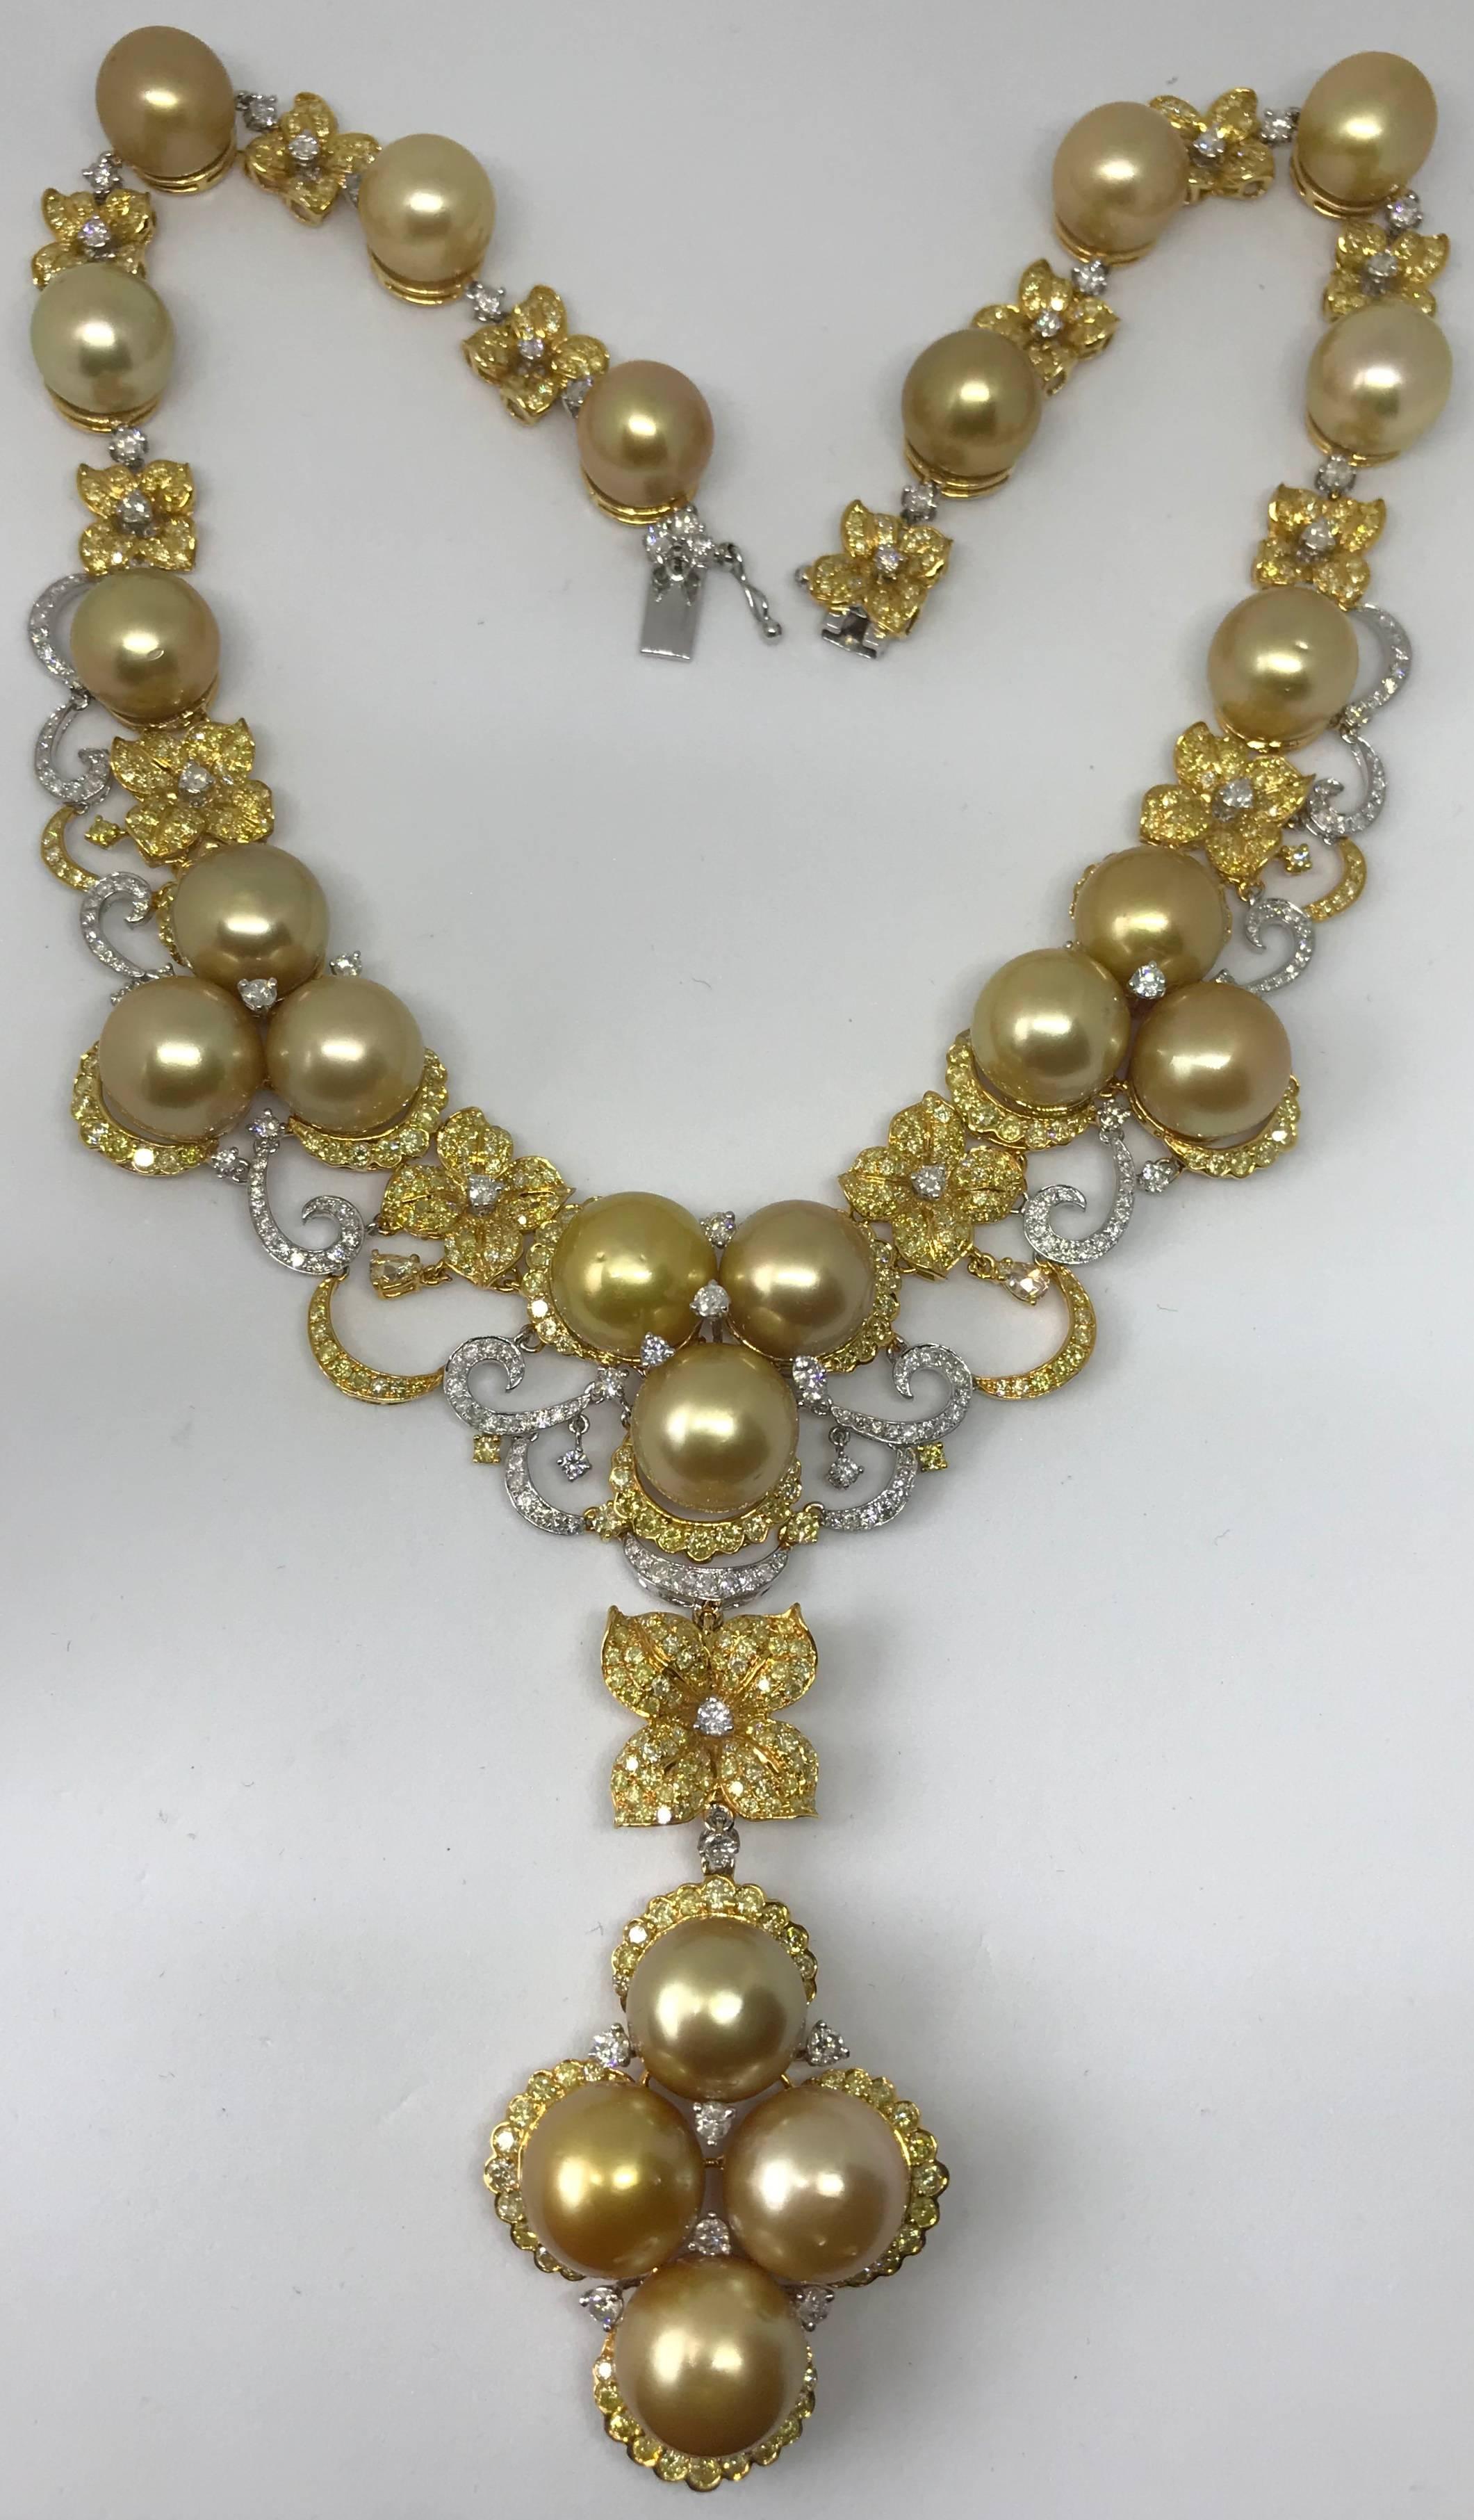 18k Multi color Gold Necklace set with finest no blemishes Golden South Sea Pearls.
Necklaces is set with:
1. Diamond Round VS FG -197 stones 5.13 Carat
2. Fancy Diamonds 701 stones 8.93 Carat 
3. Fancy Diamond 2 stones-- 0.31 carat
4. Golden South